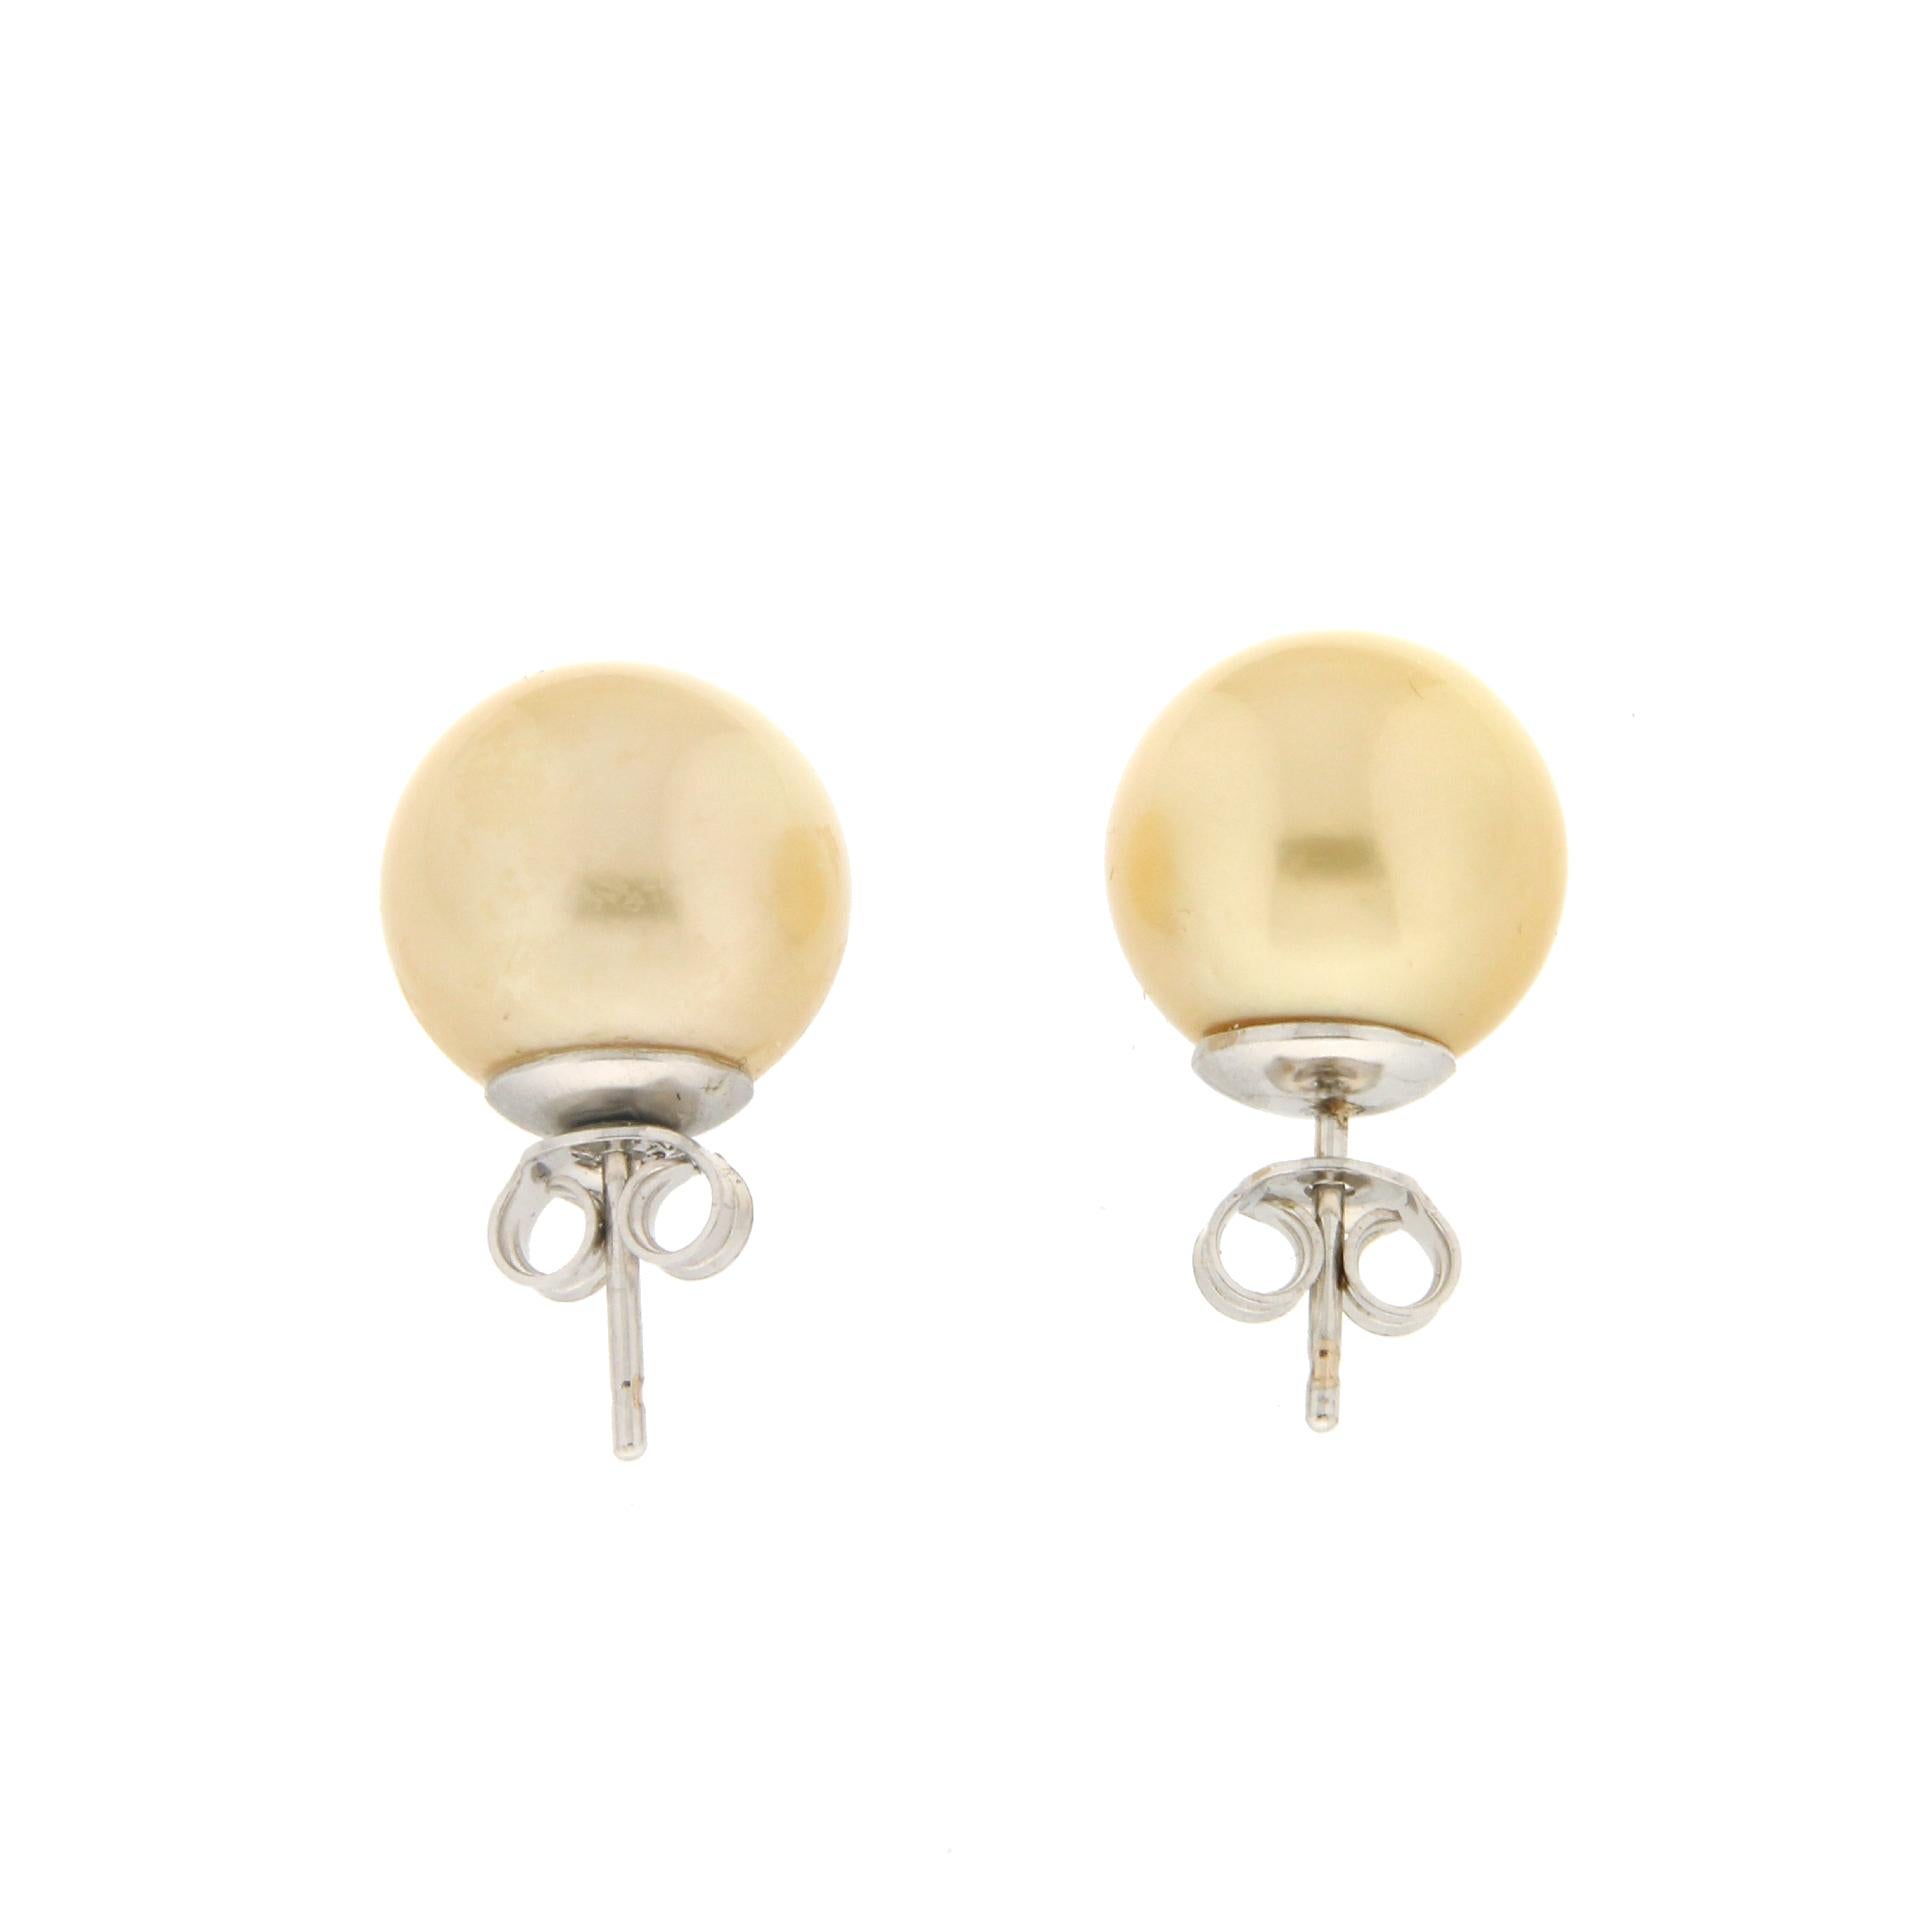 Round Cut Handcraft Pearls 18 Karat White Gold Stud Earrings For Sale